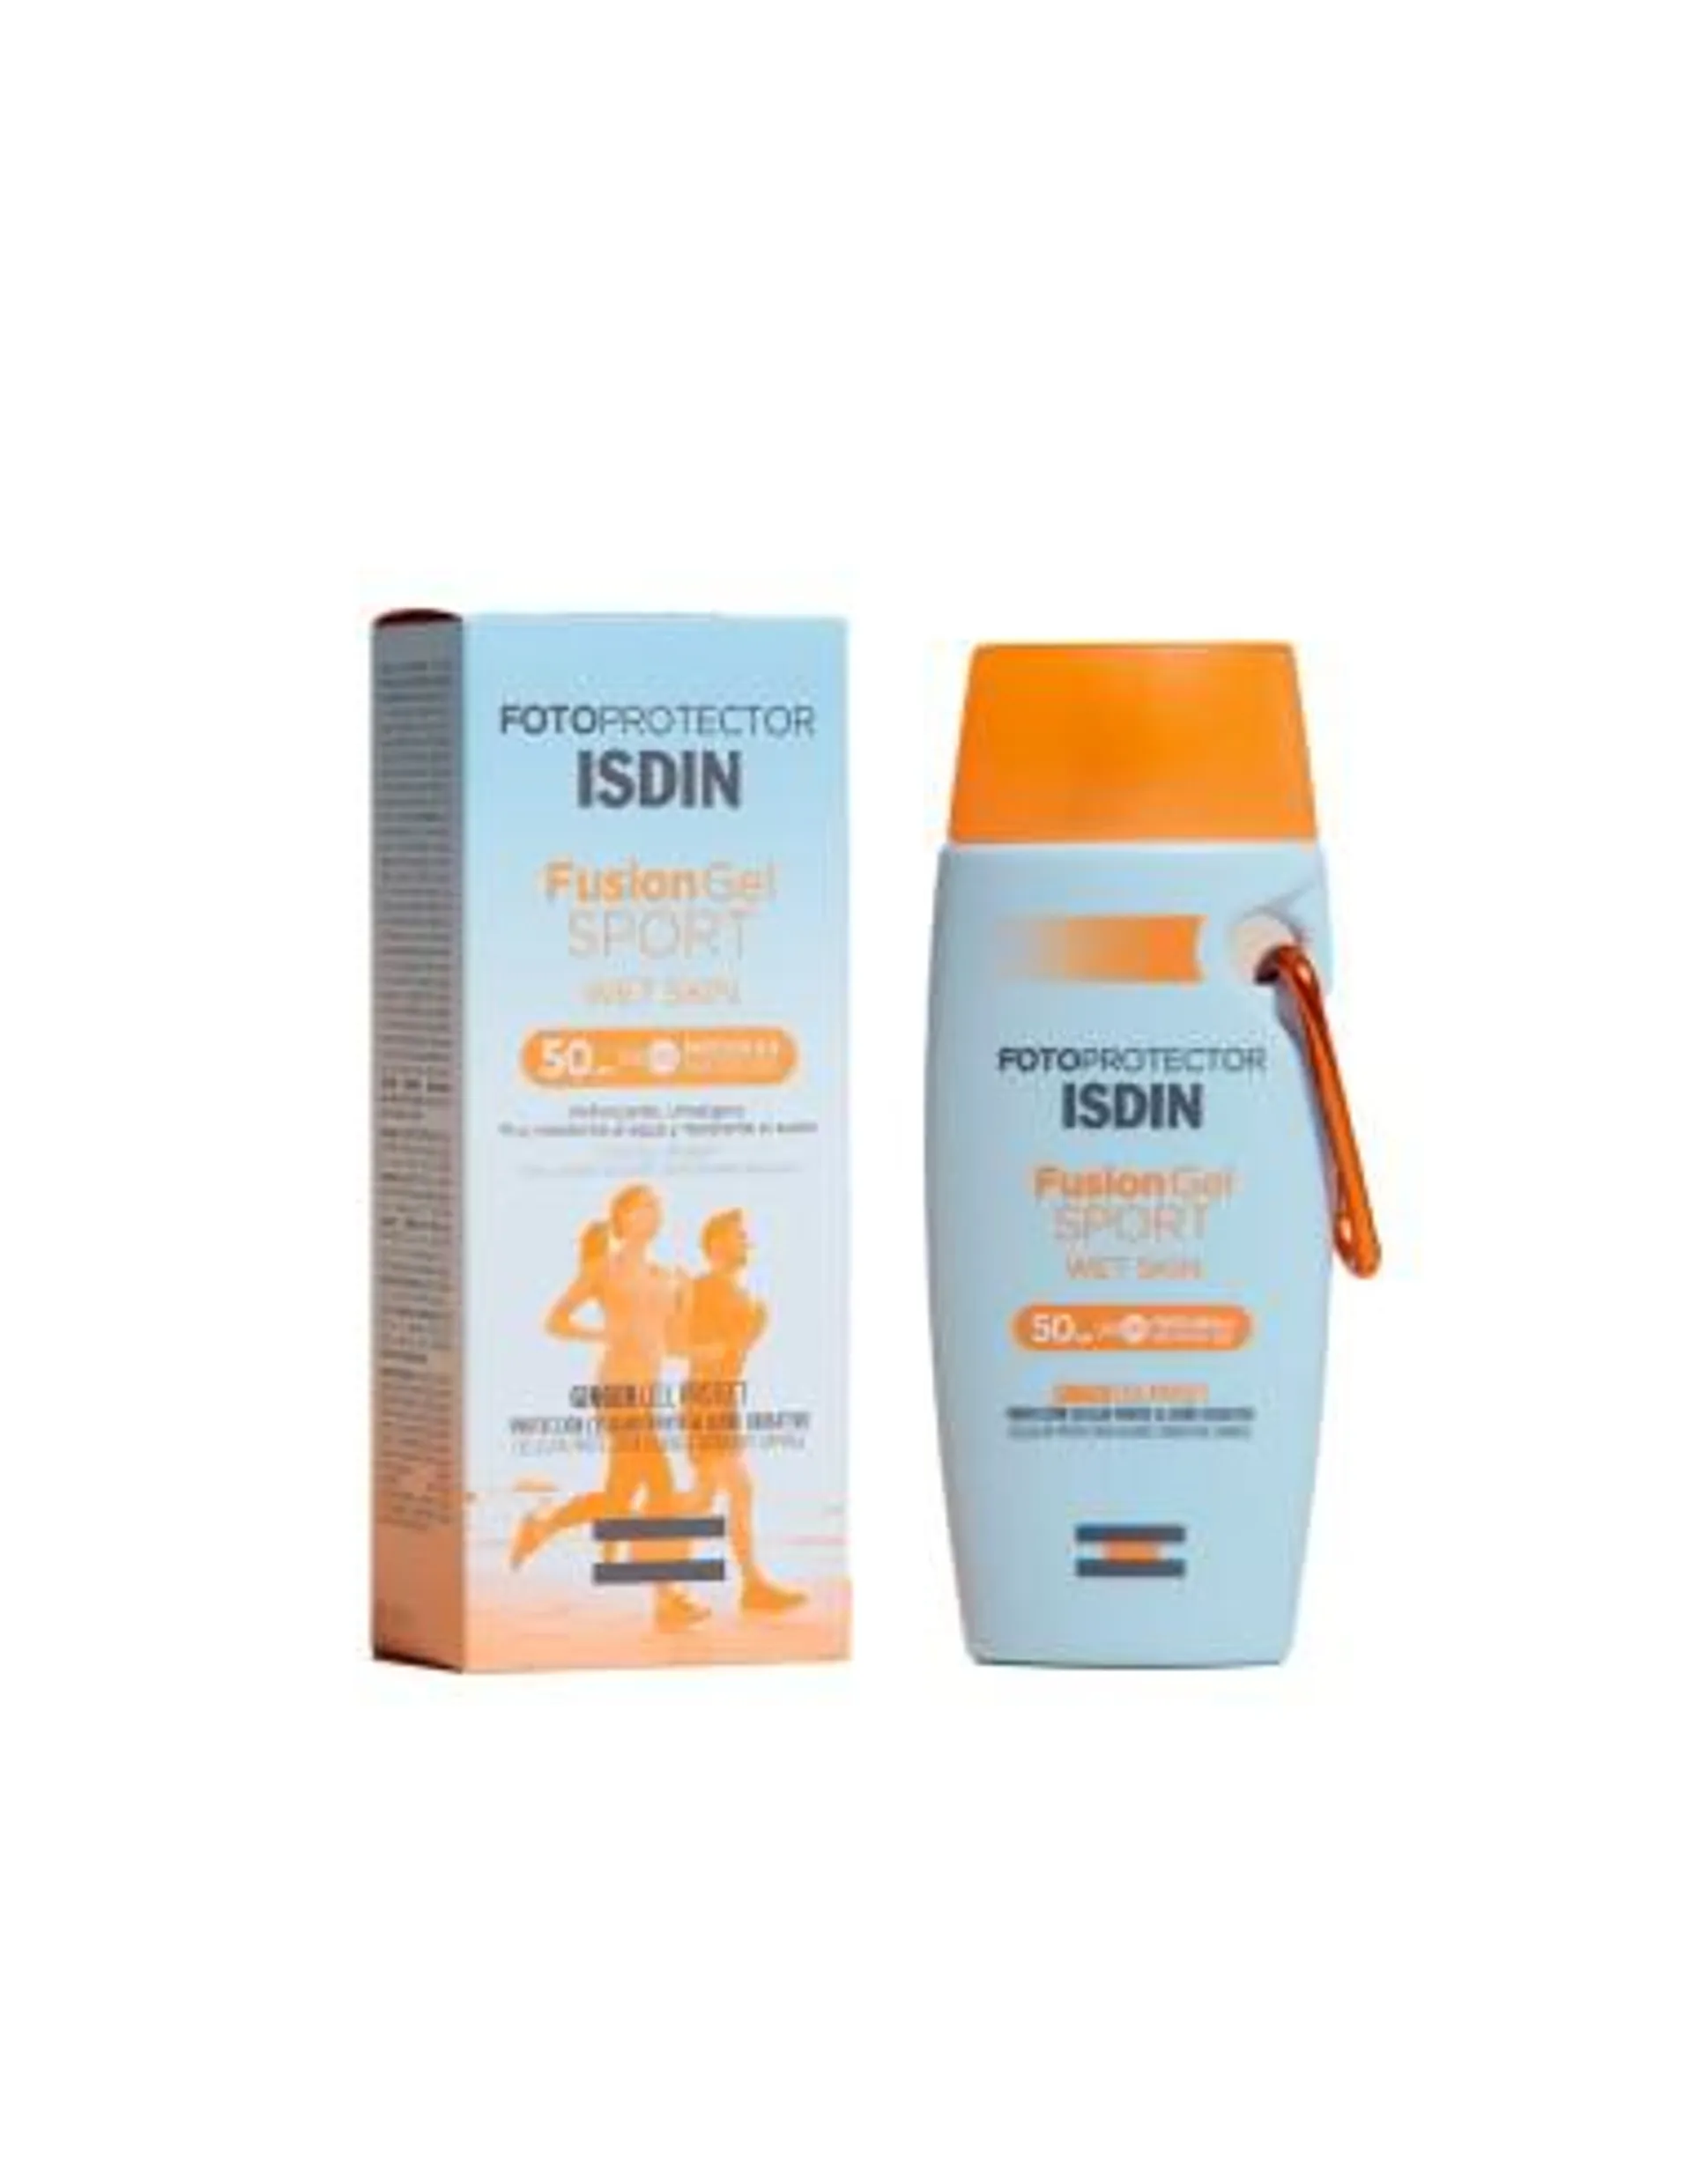 Kit Isdin Fusion Gel Sport + Protector Fusion Water x10ml